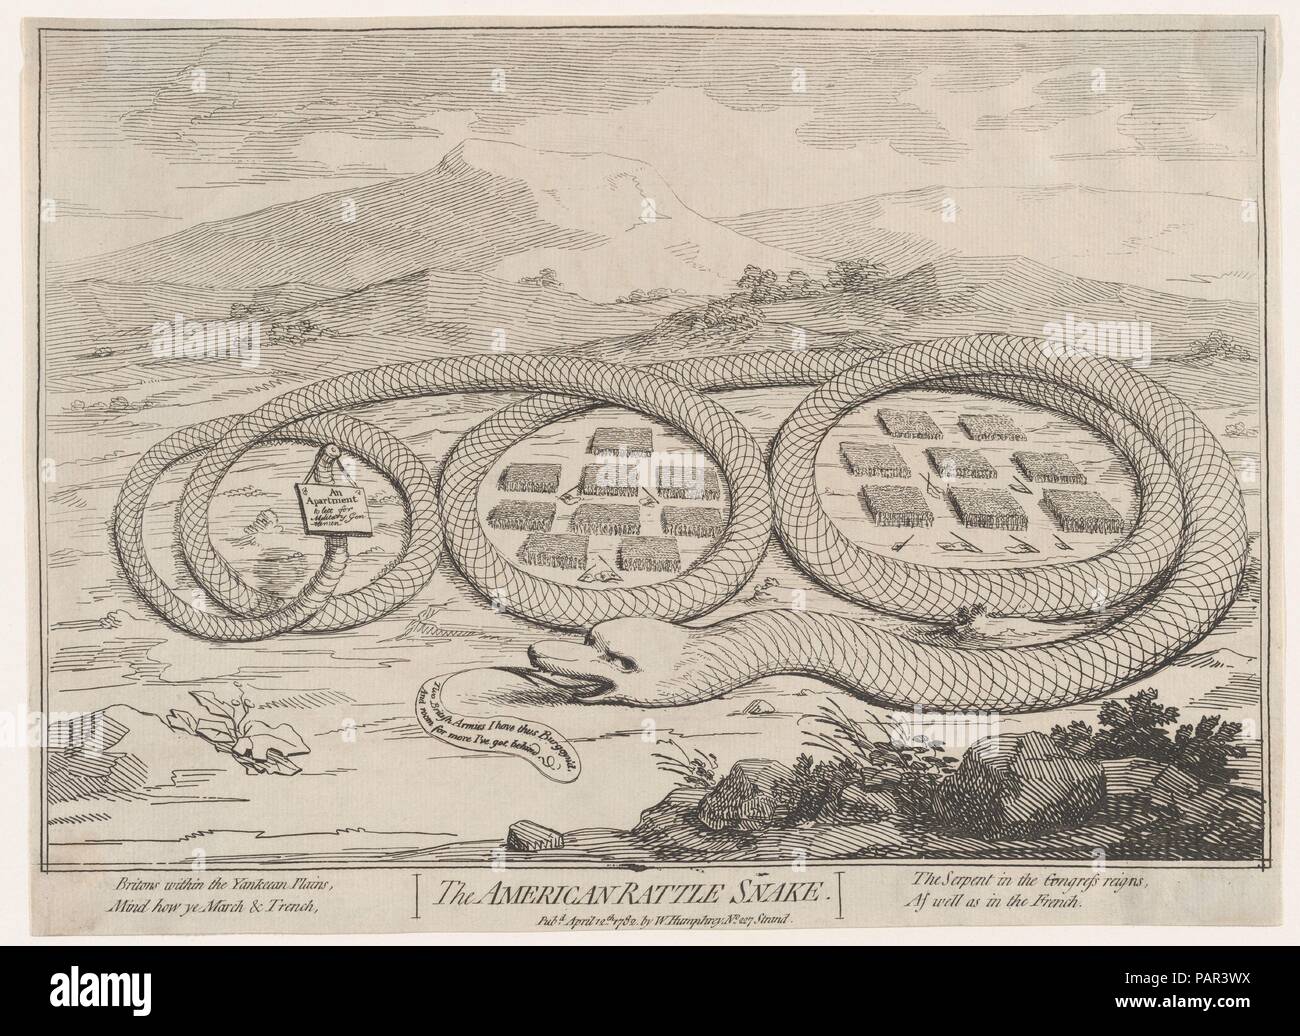 The American Rattle Snake. Artist: Attributed to James Gillray (British, Chelsea 1756-1815 London). Dimensions: plate (partly clipped): 8 5/8 x 12 11/16 in. (21.9 x 32.2 cm)  sheet: 9 7/16 x 12 15/16 in. (23.9 x 32.8 cm). Publisher: Published London by William Richardson (British, active 1778-1812). Date: April 12, 1782.  This satirical print, perhaps one of Gillray's earliest, uses a snake--a popular American symbol before the invention of the emblematic stars and stripes. The coils here surround two military camps with text below that states, 'Two British Armies I have thus Burgoyn'd, And ro Stock Photo